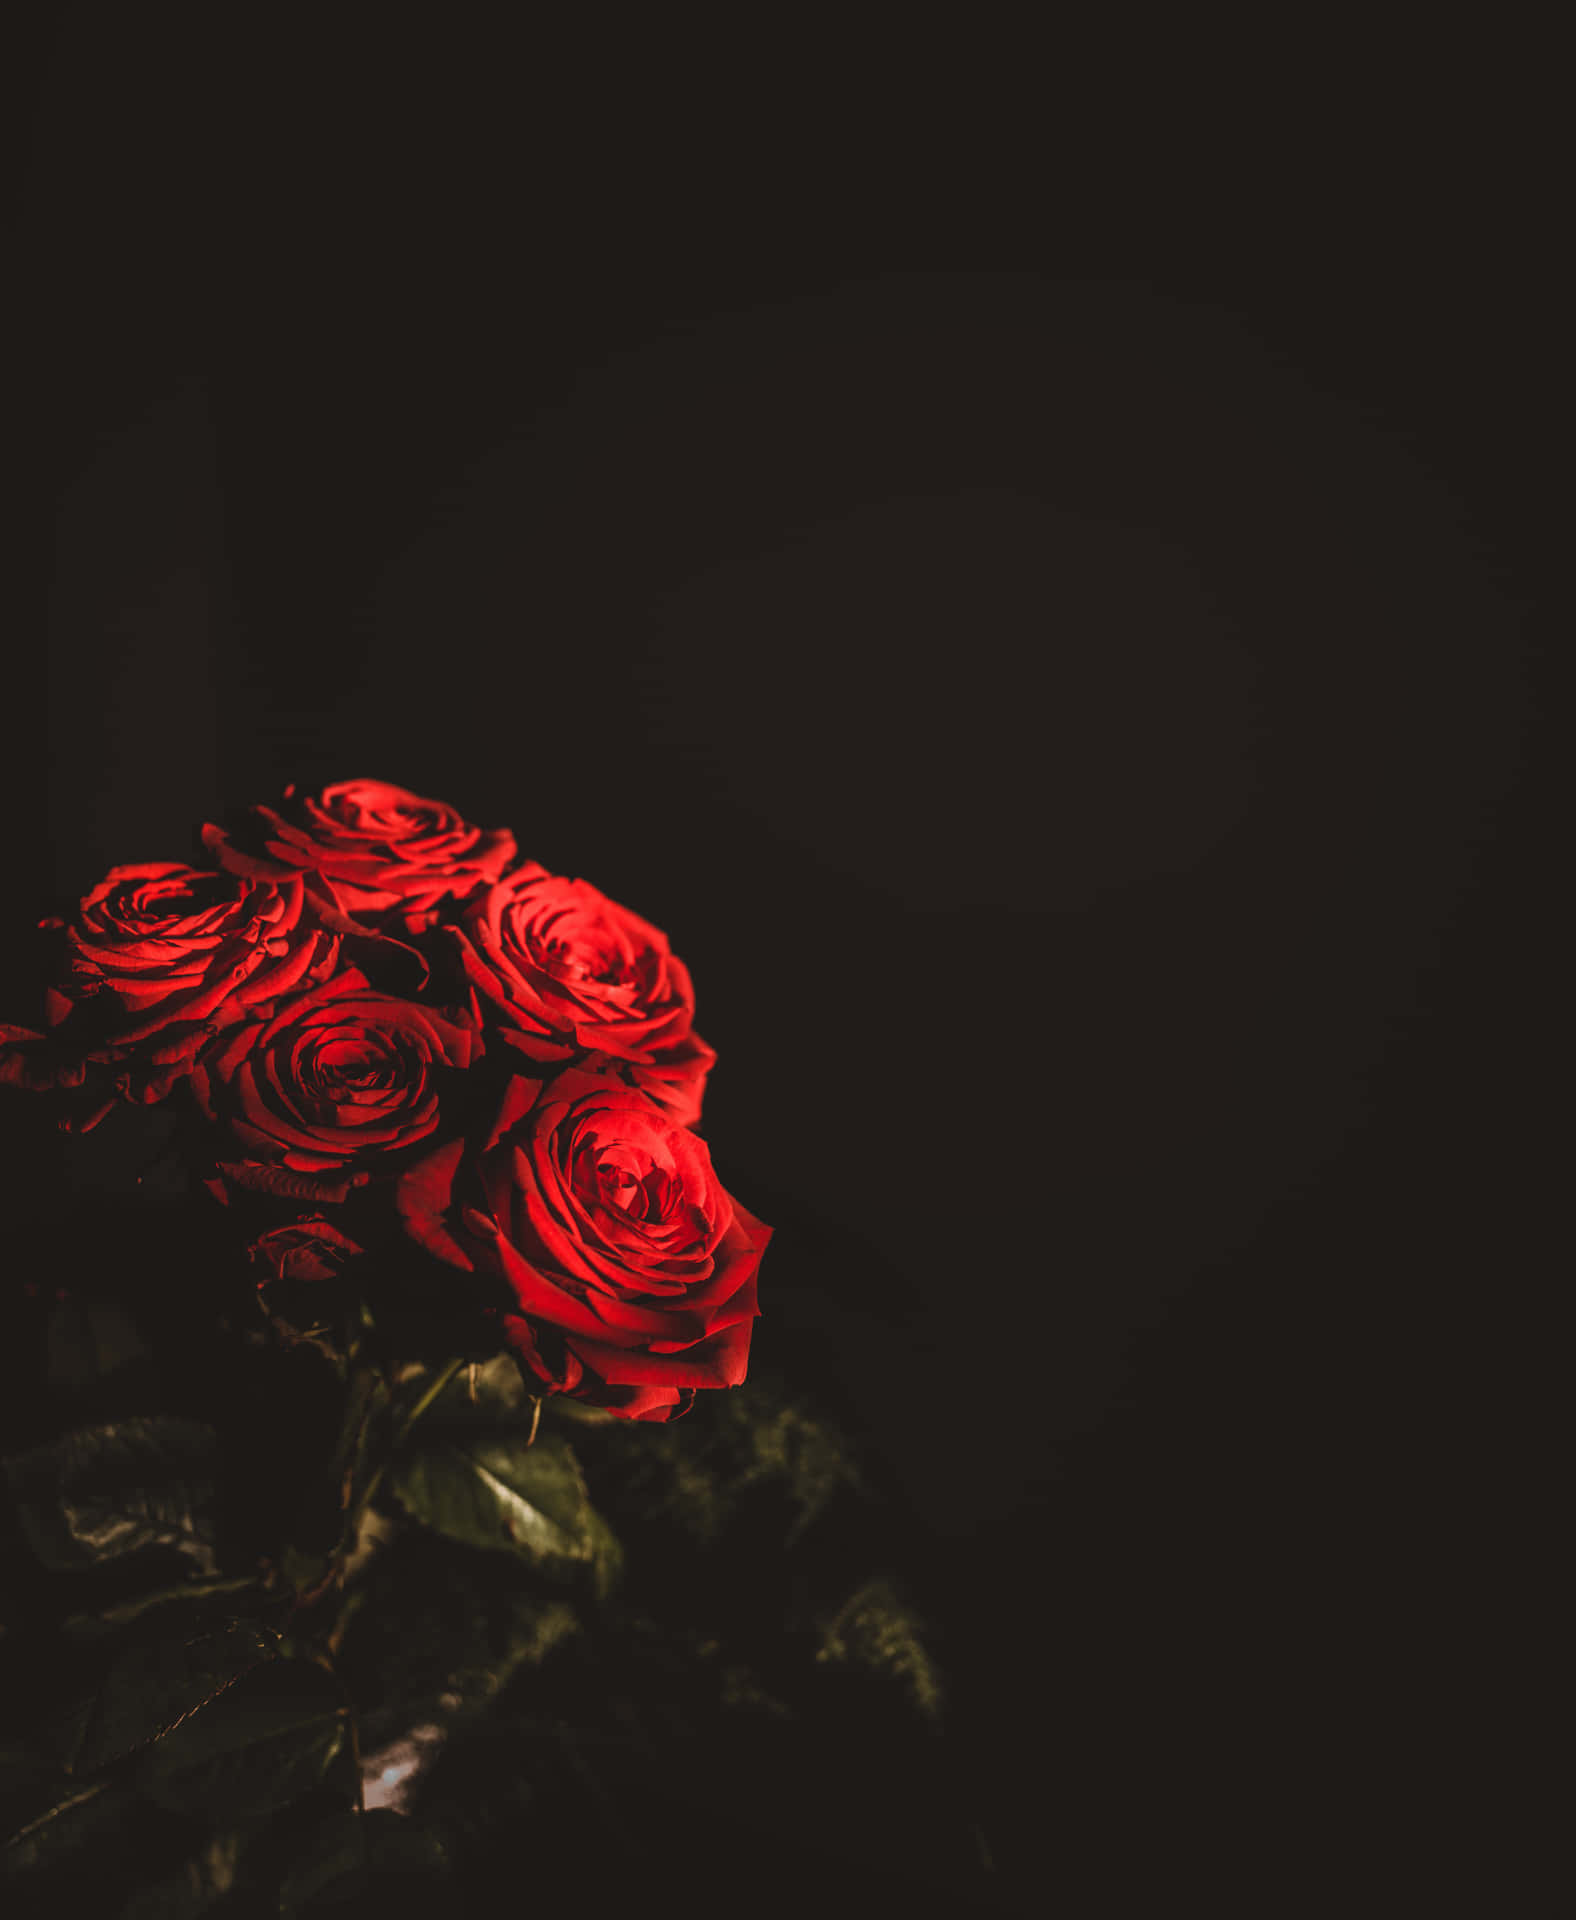 A Bouquet Of Red Roses On A Black Background